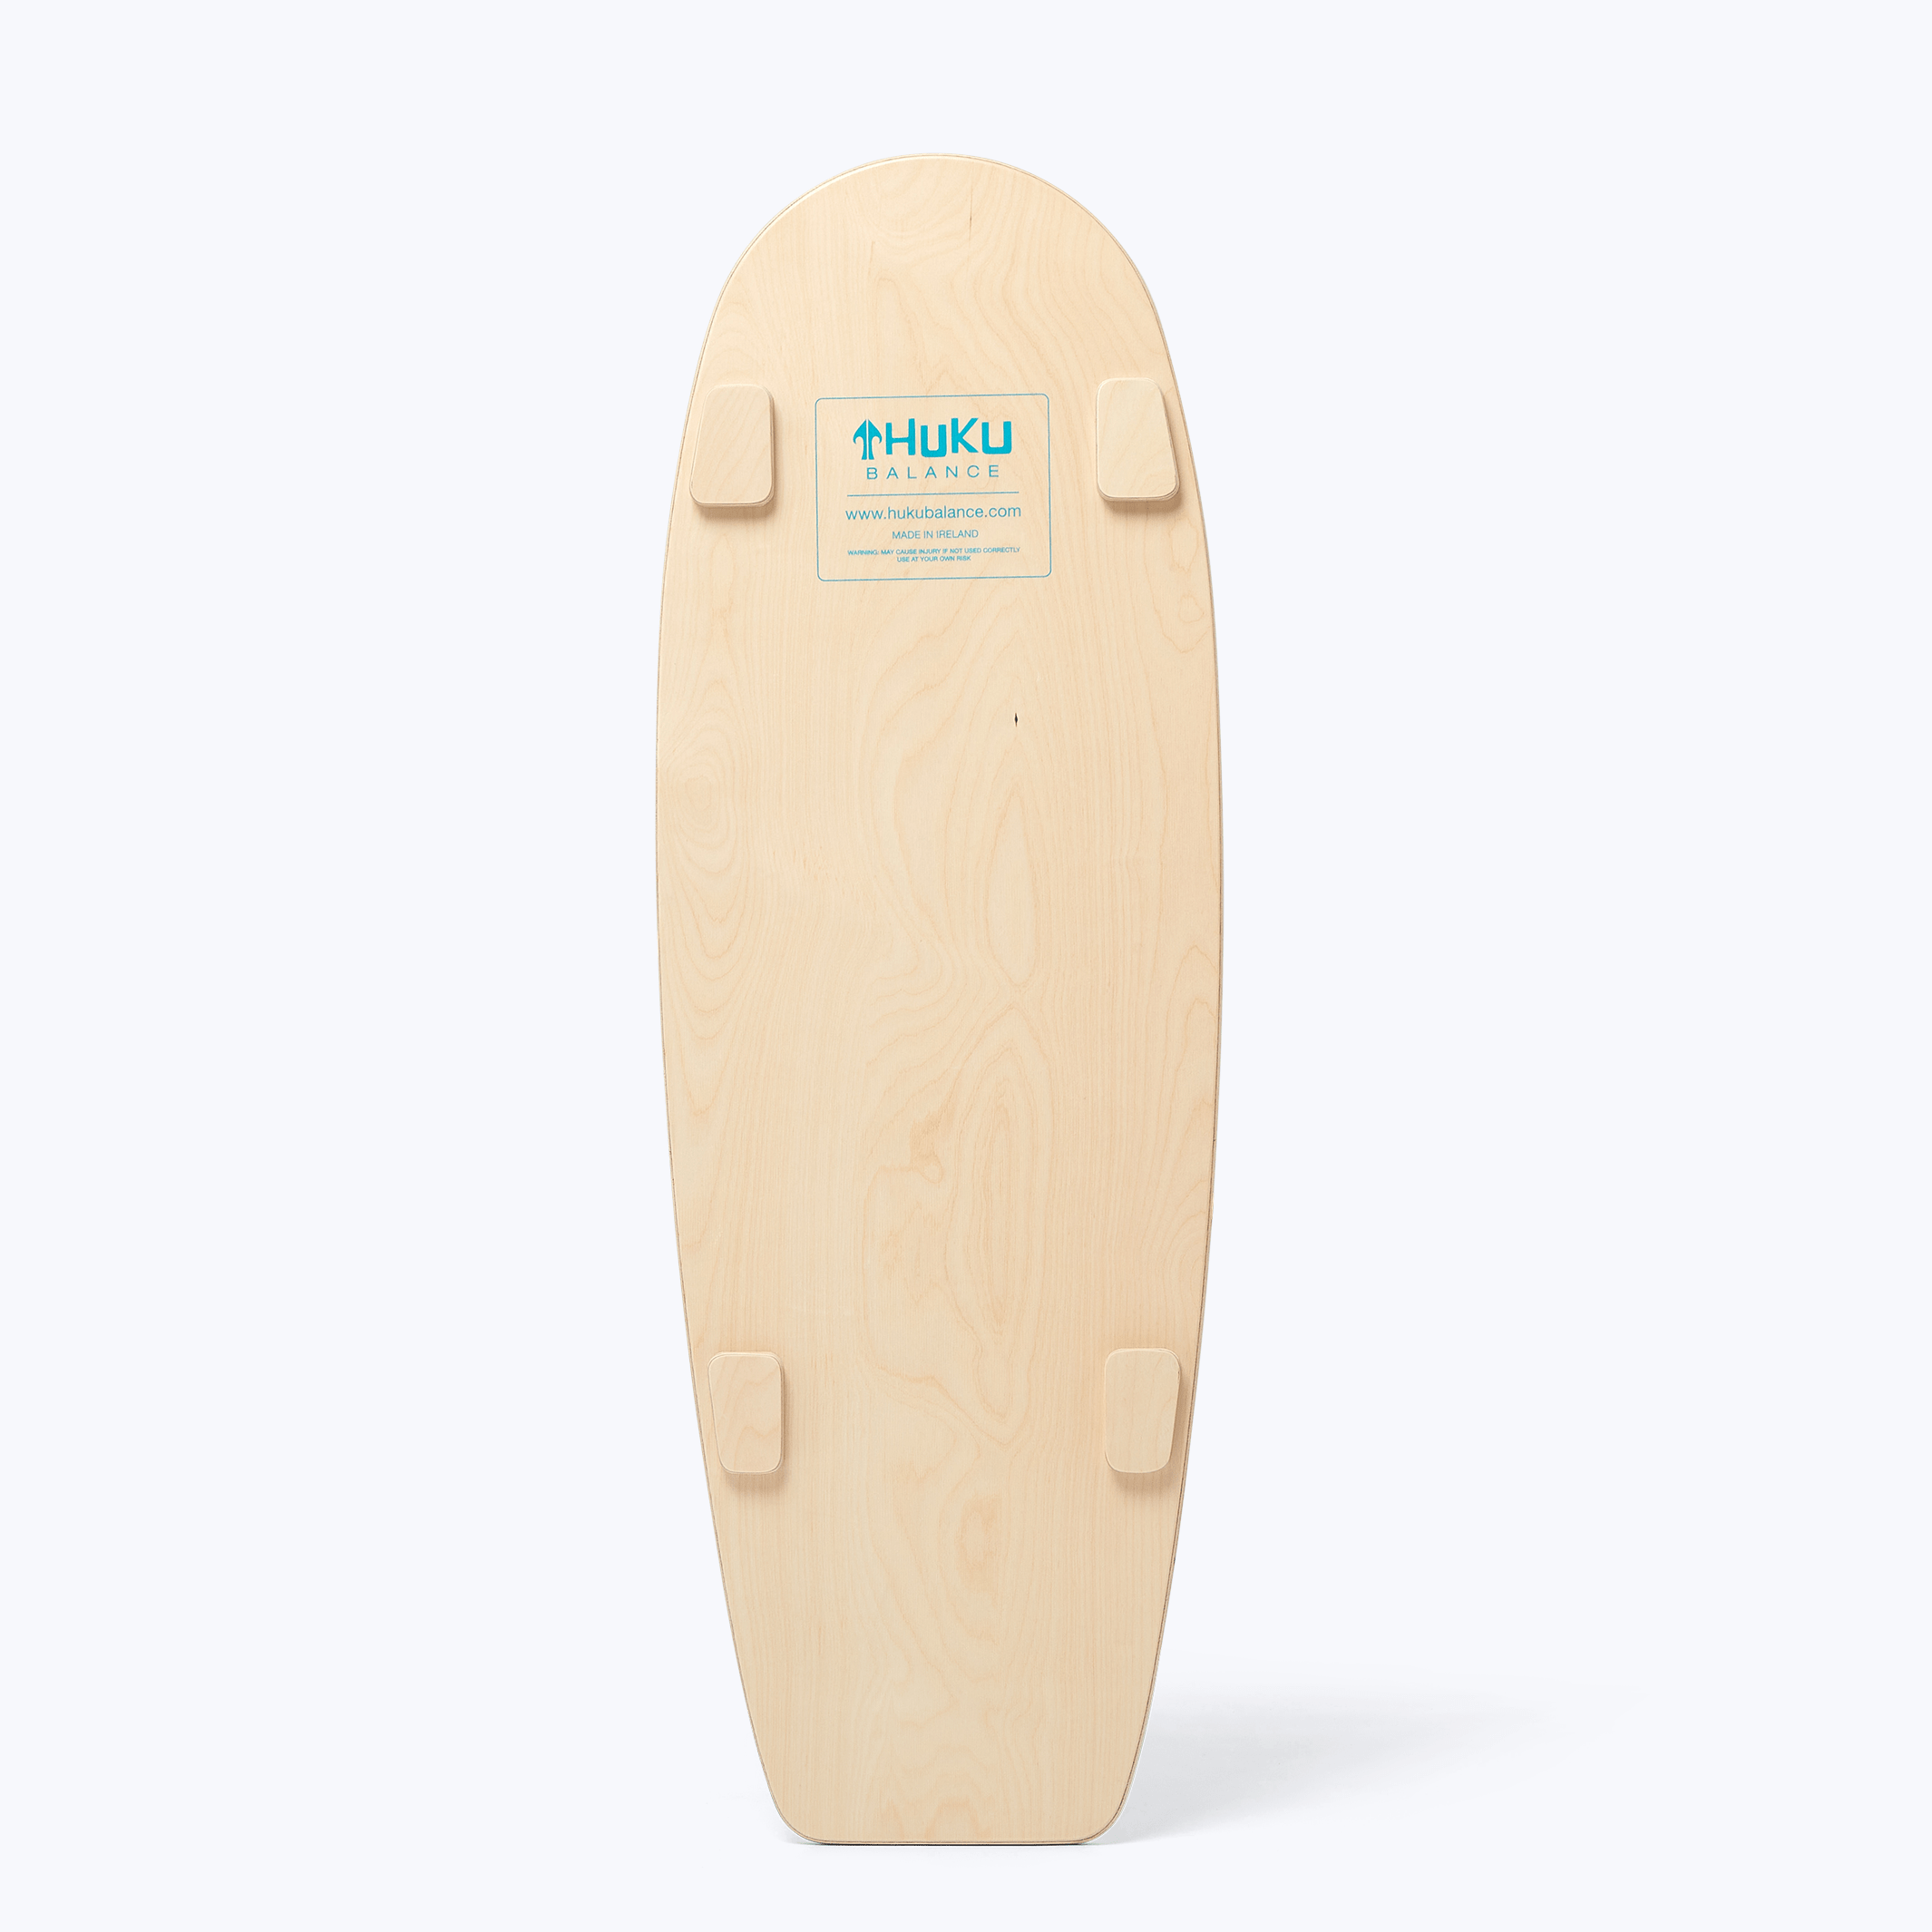 Huku Nalu Deck with 4 stoppers to roll both ways. Perfect for surfers, snowboarders, wakeboarders, and all board riders. 